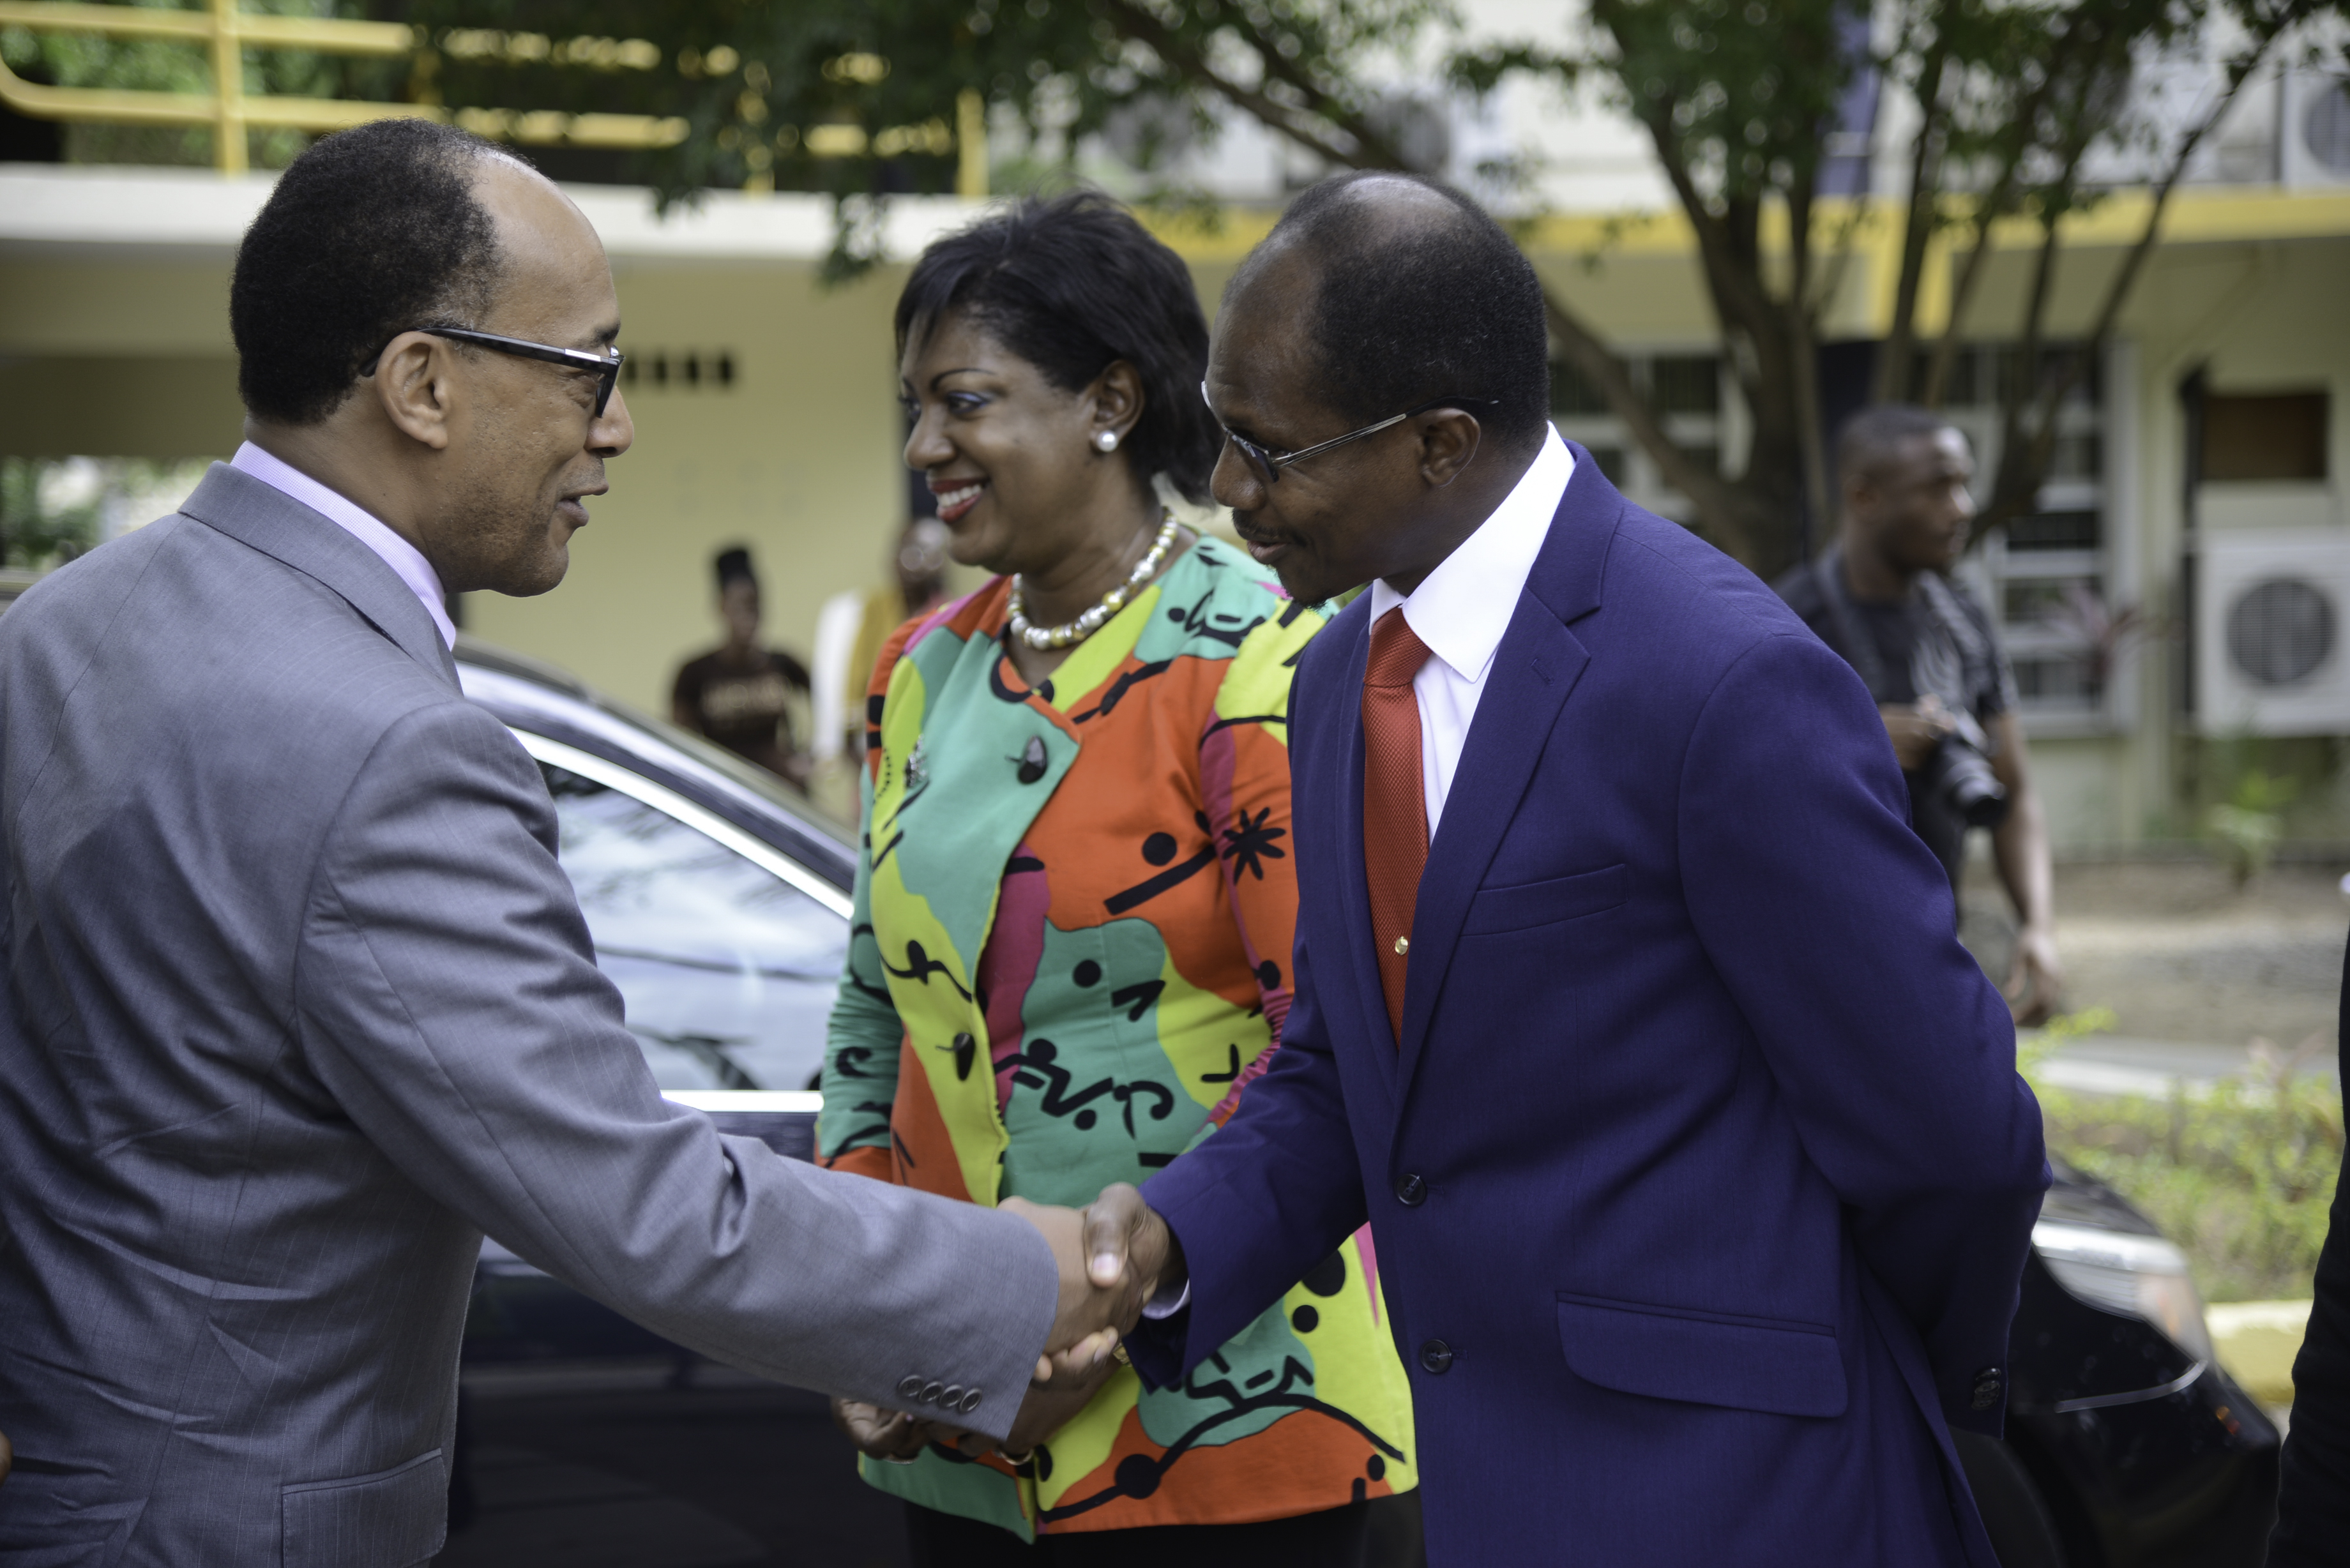 Prince Ermias Sahle Selassie (left), grandson of Ethiopian Emperor Haile Selassie I is greeted by Professor Colin Gyles Acting President of the University of Technology, Jamaica during his visit to the campus of the University of Technology, Jamaica on April 21 2016.